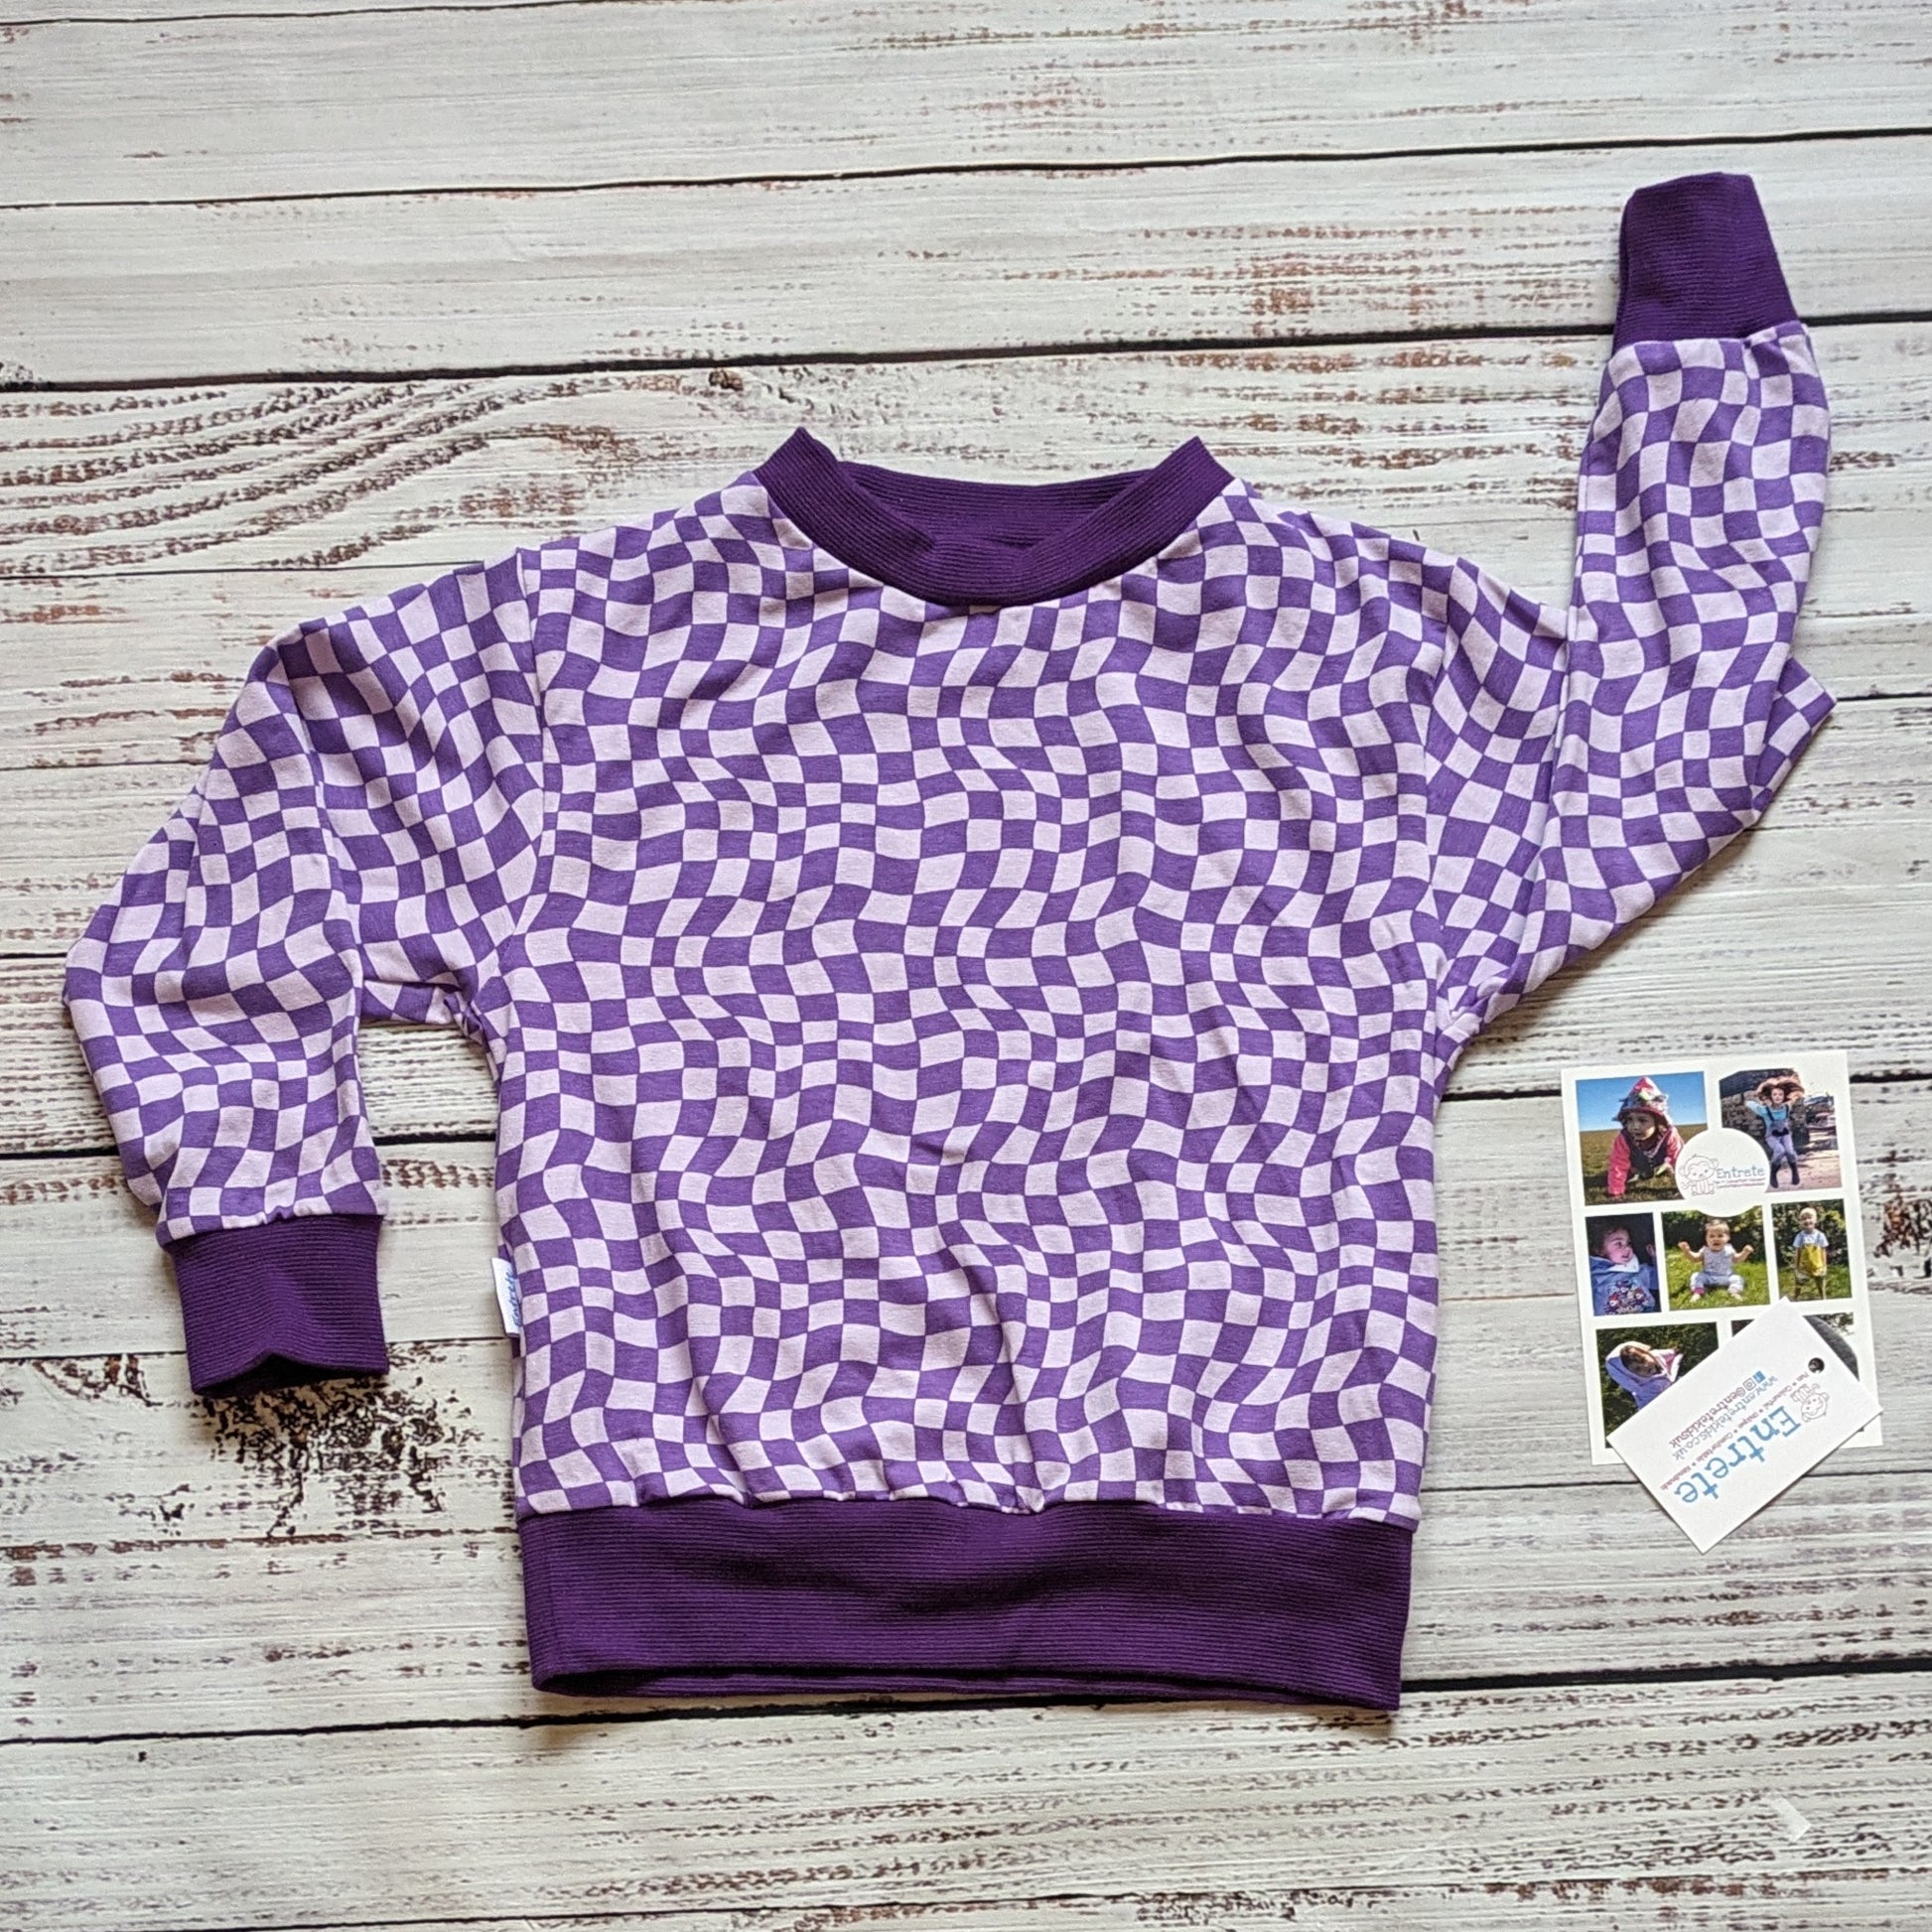 Warped purple trippy checked sweatshirt. Handmade using soft and comfy cotton jersey and cotton ribbing.